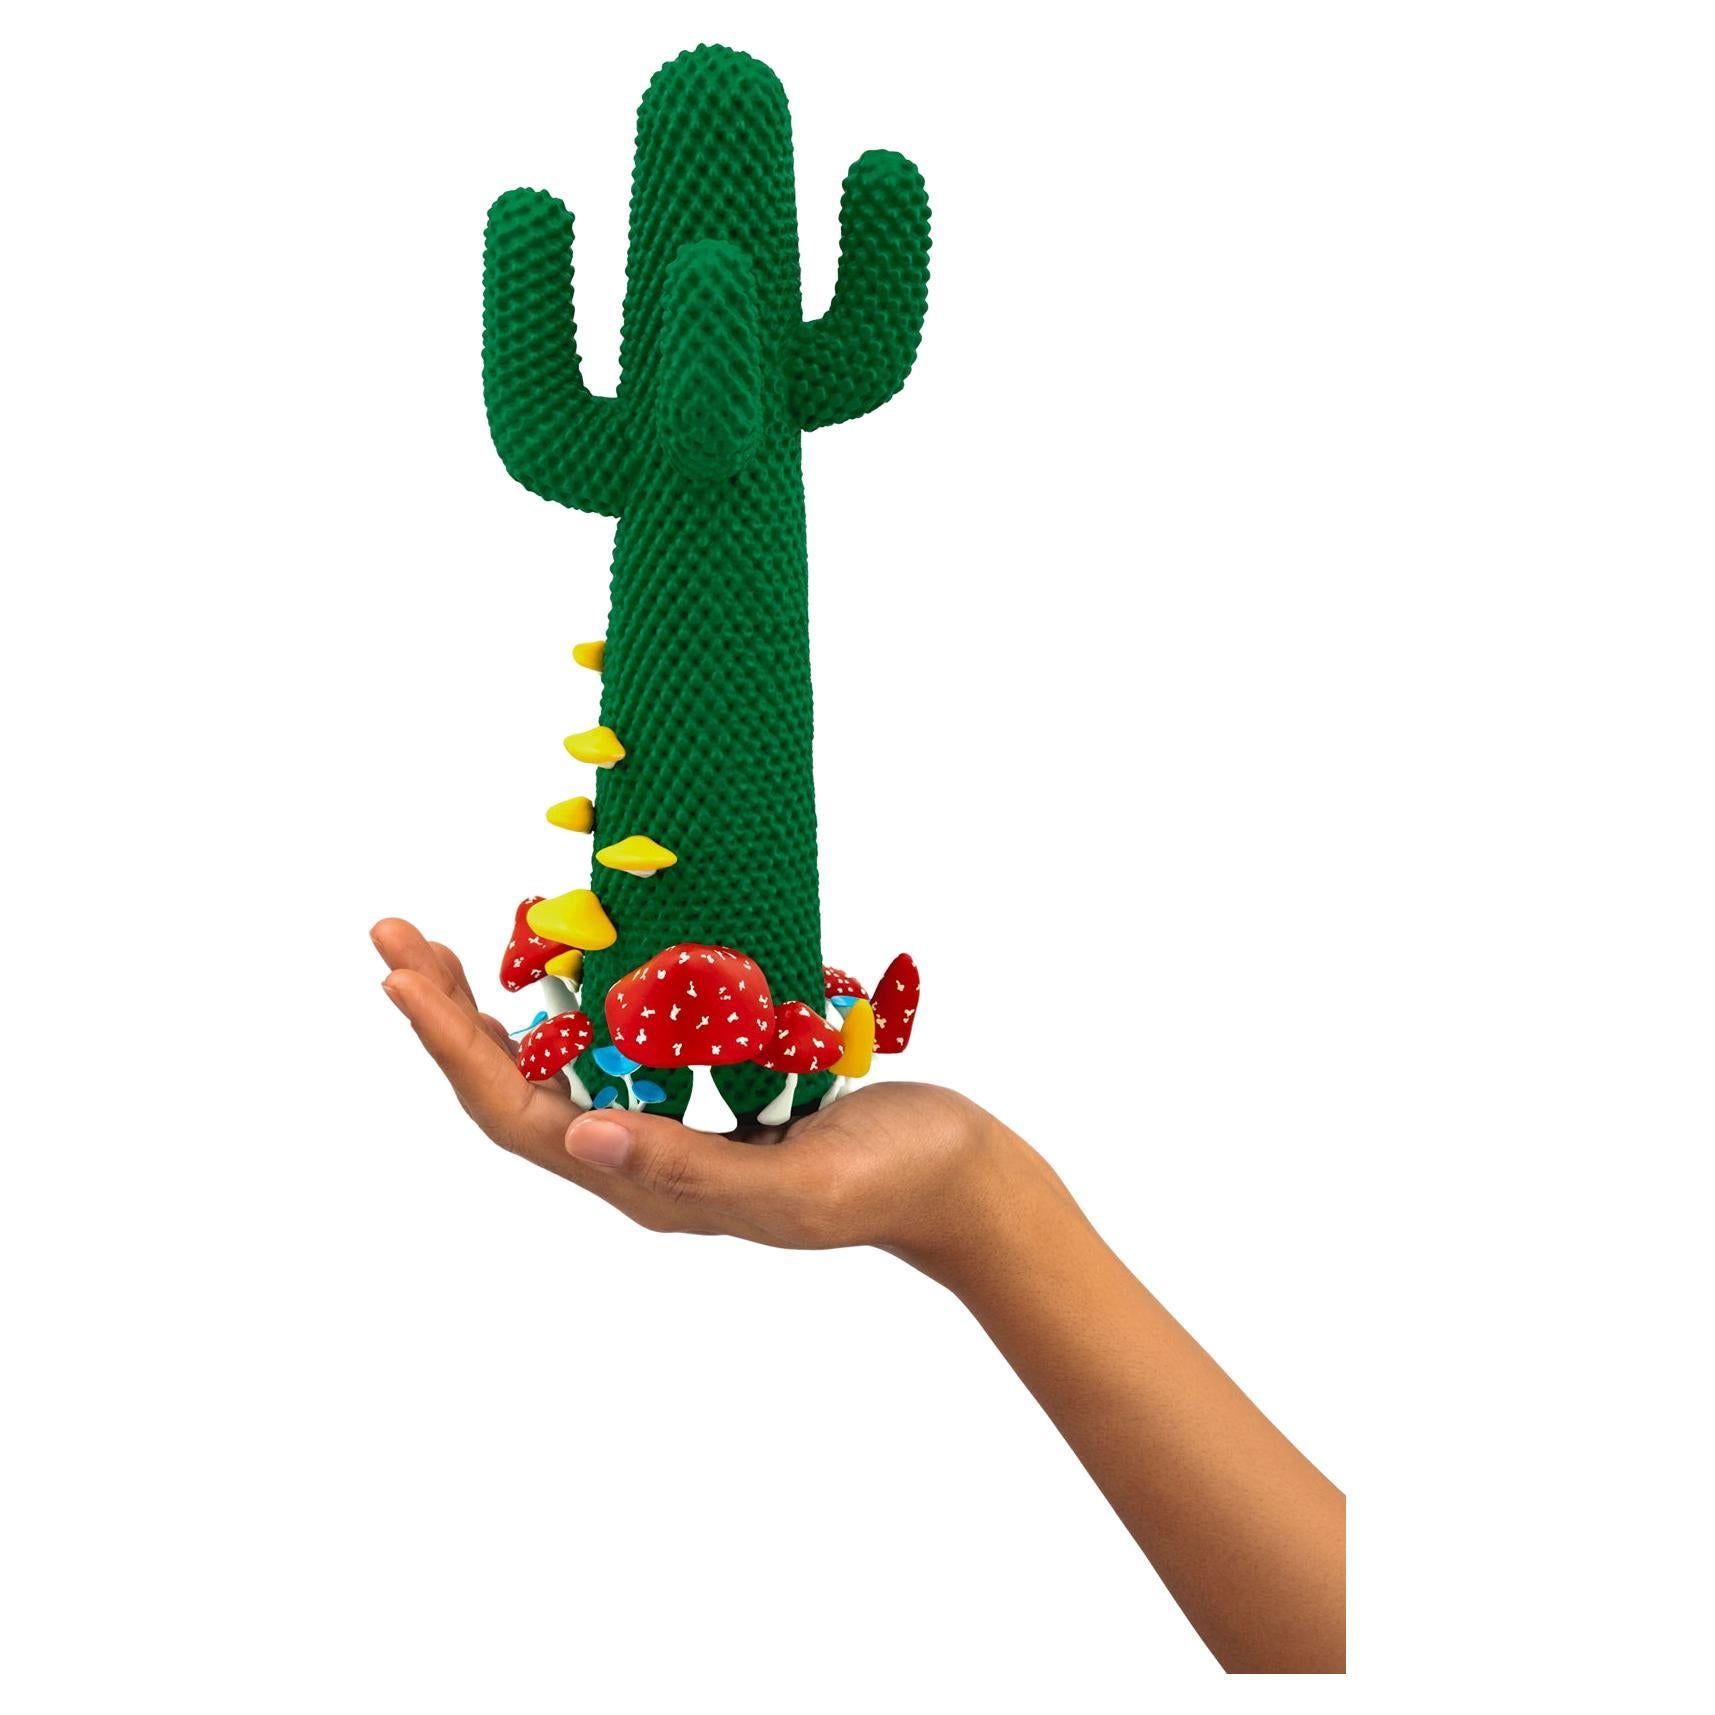 Limited Edition #95/99

Gufram presents the miniaturised version of the Shroom CACTUS® created in collaboration with A$AP Rocky and the artist’s new design studio HOMMEMADE Exactly as the real-size Shroom CACTUS®, the new Guframini piece features